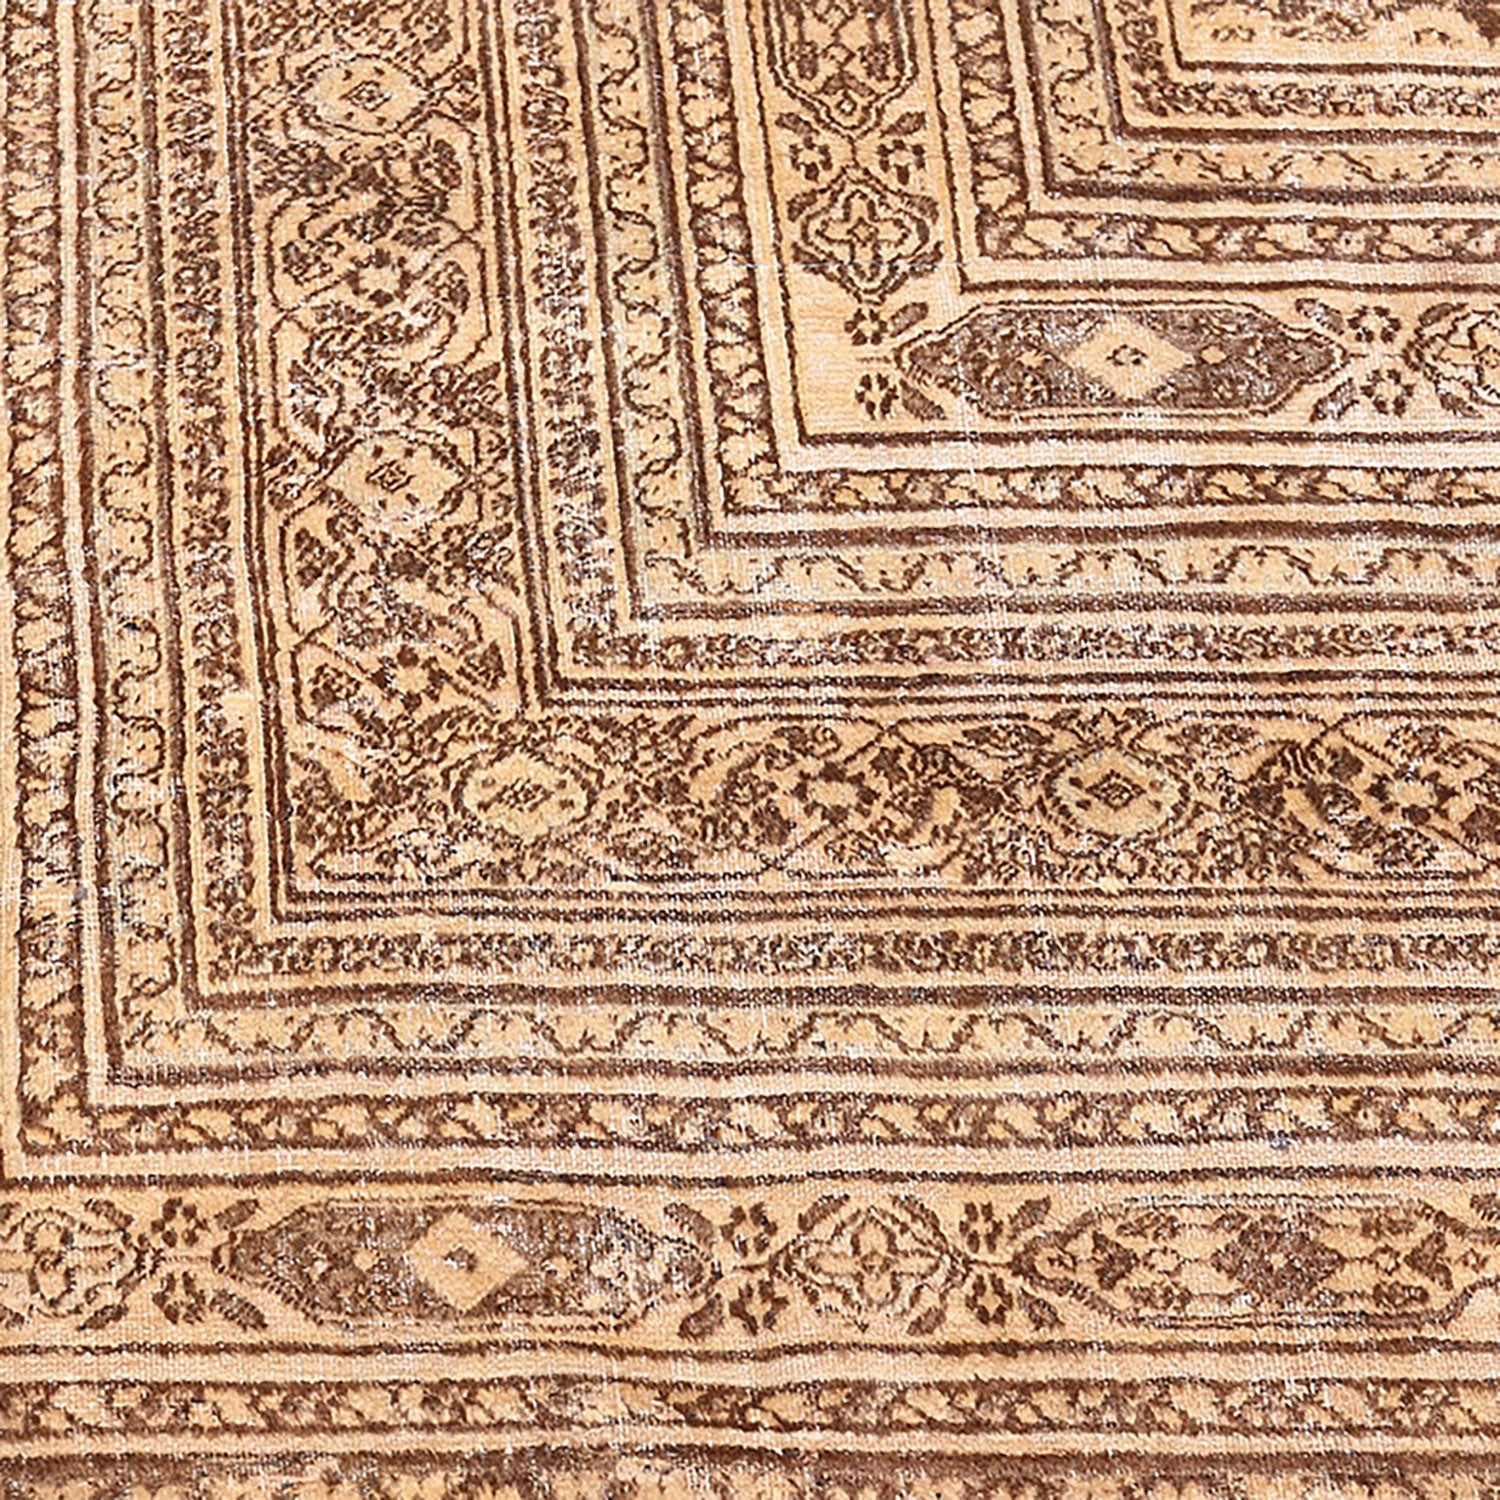 Close-up of a traditional patterned carpet with intricate details and earth tones.